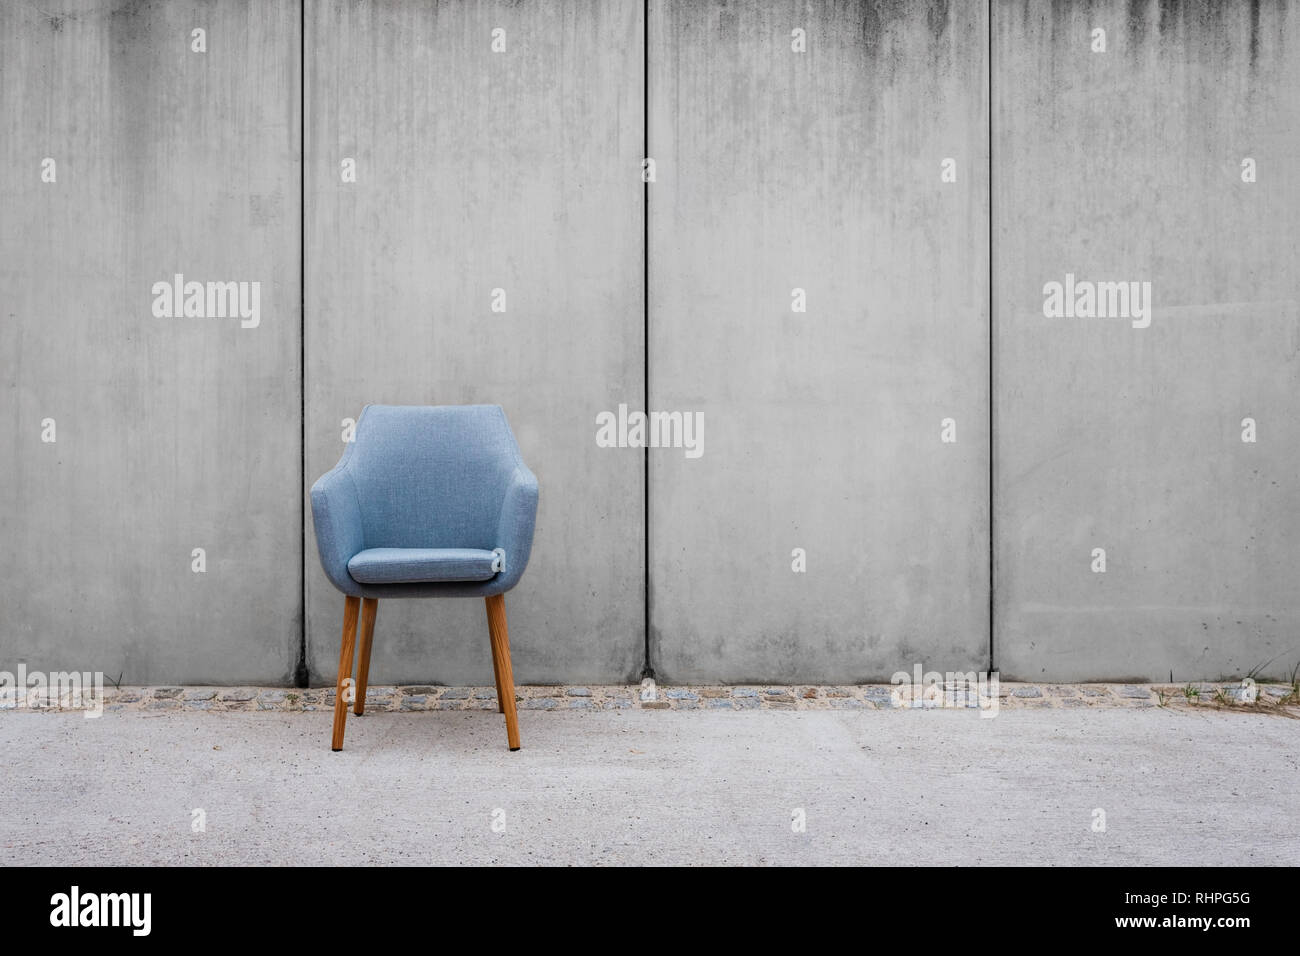 empty chair with concrete wall background on sidewalk - Stock Photo